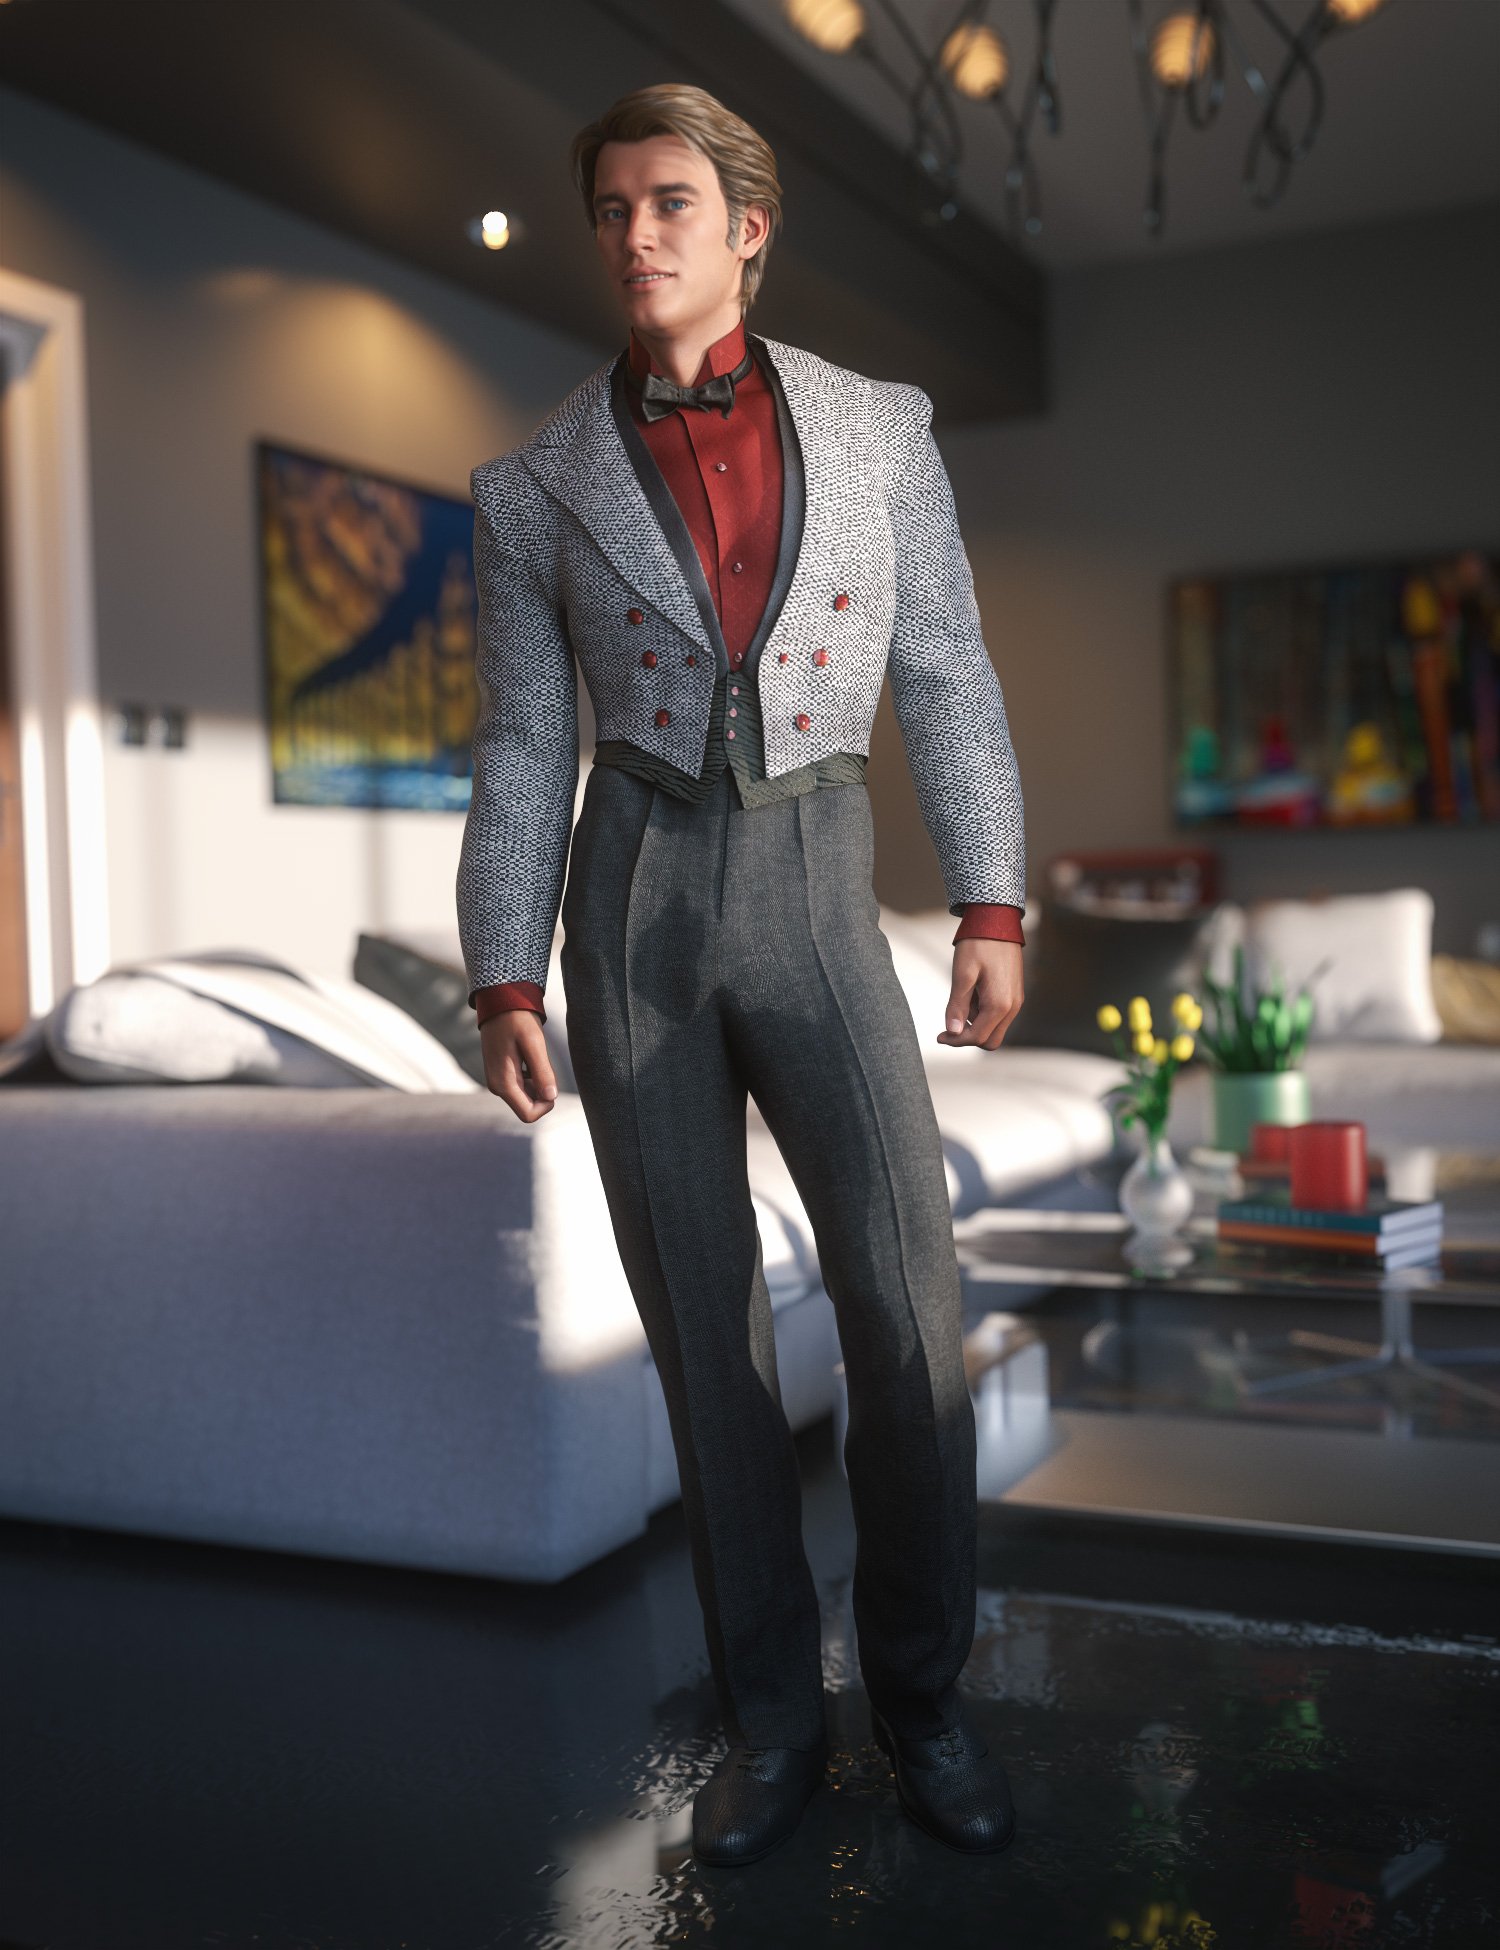 dForce White Tie Outfit Textures by: Moonscape GraphicsSade, 3D Models by Daz 3D